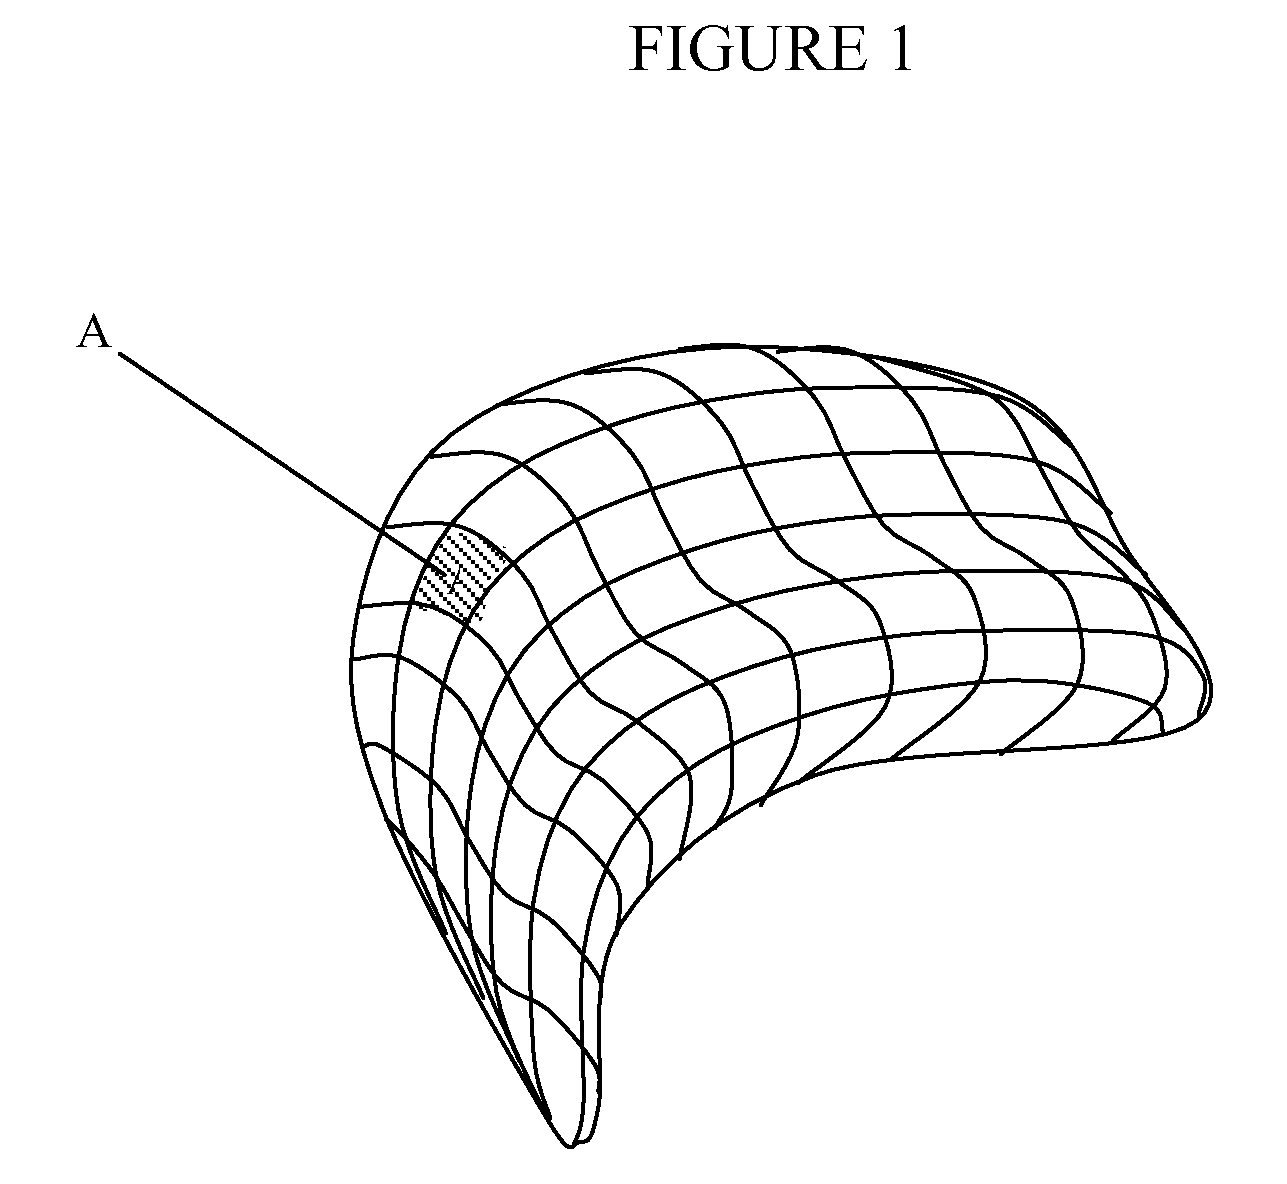 System and Method for Organ Segmentation Using Surface Patch Classification in 2D and 3D Images